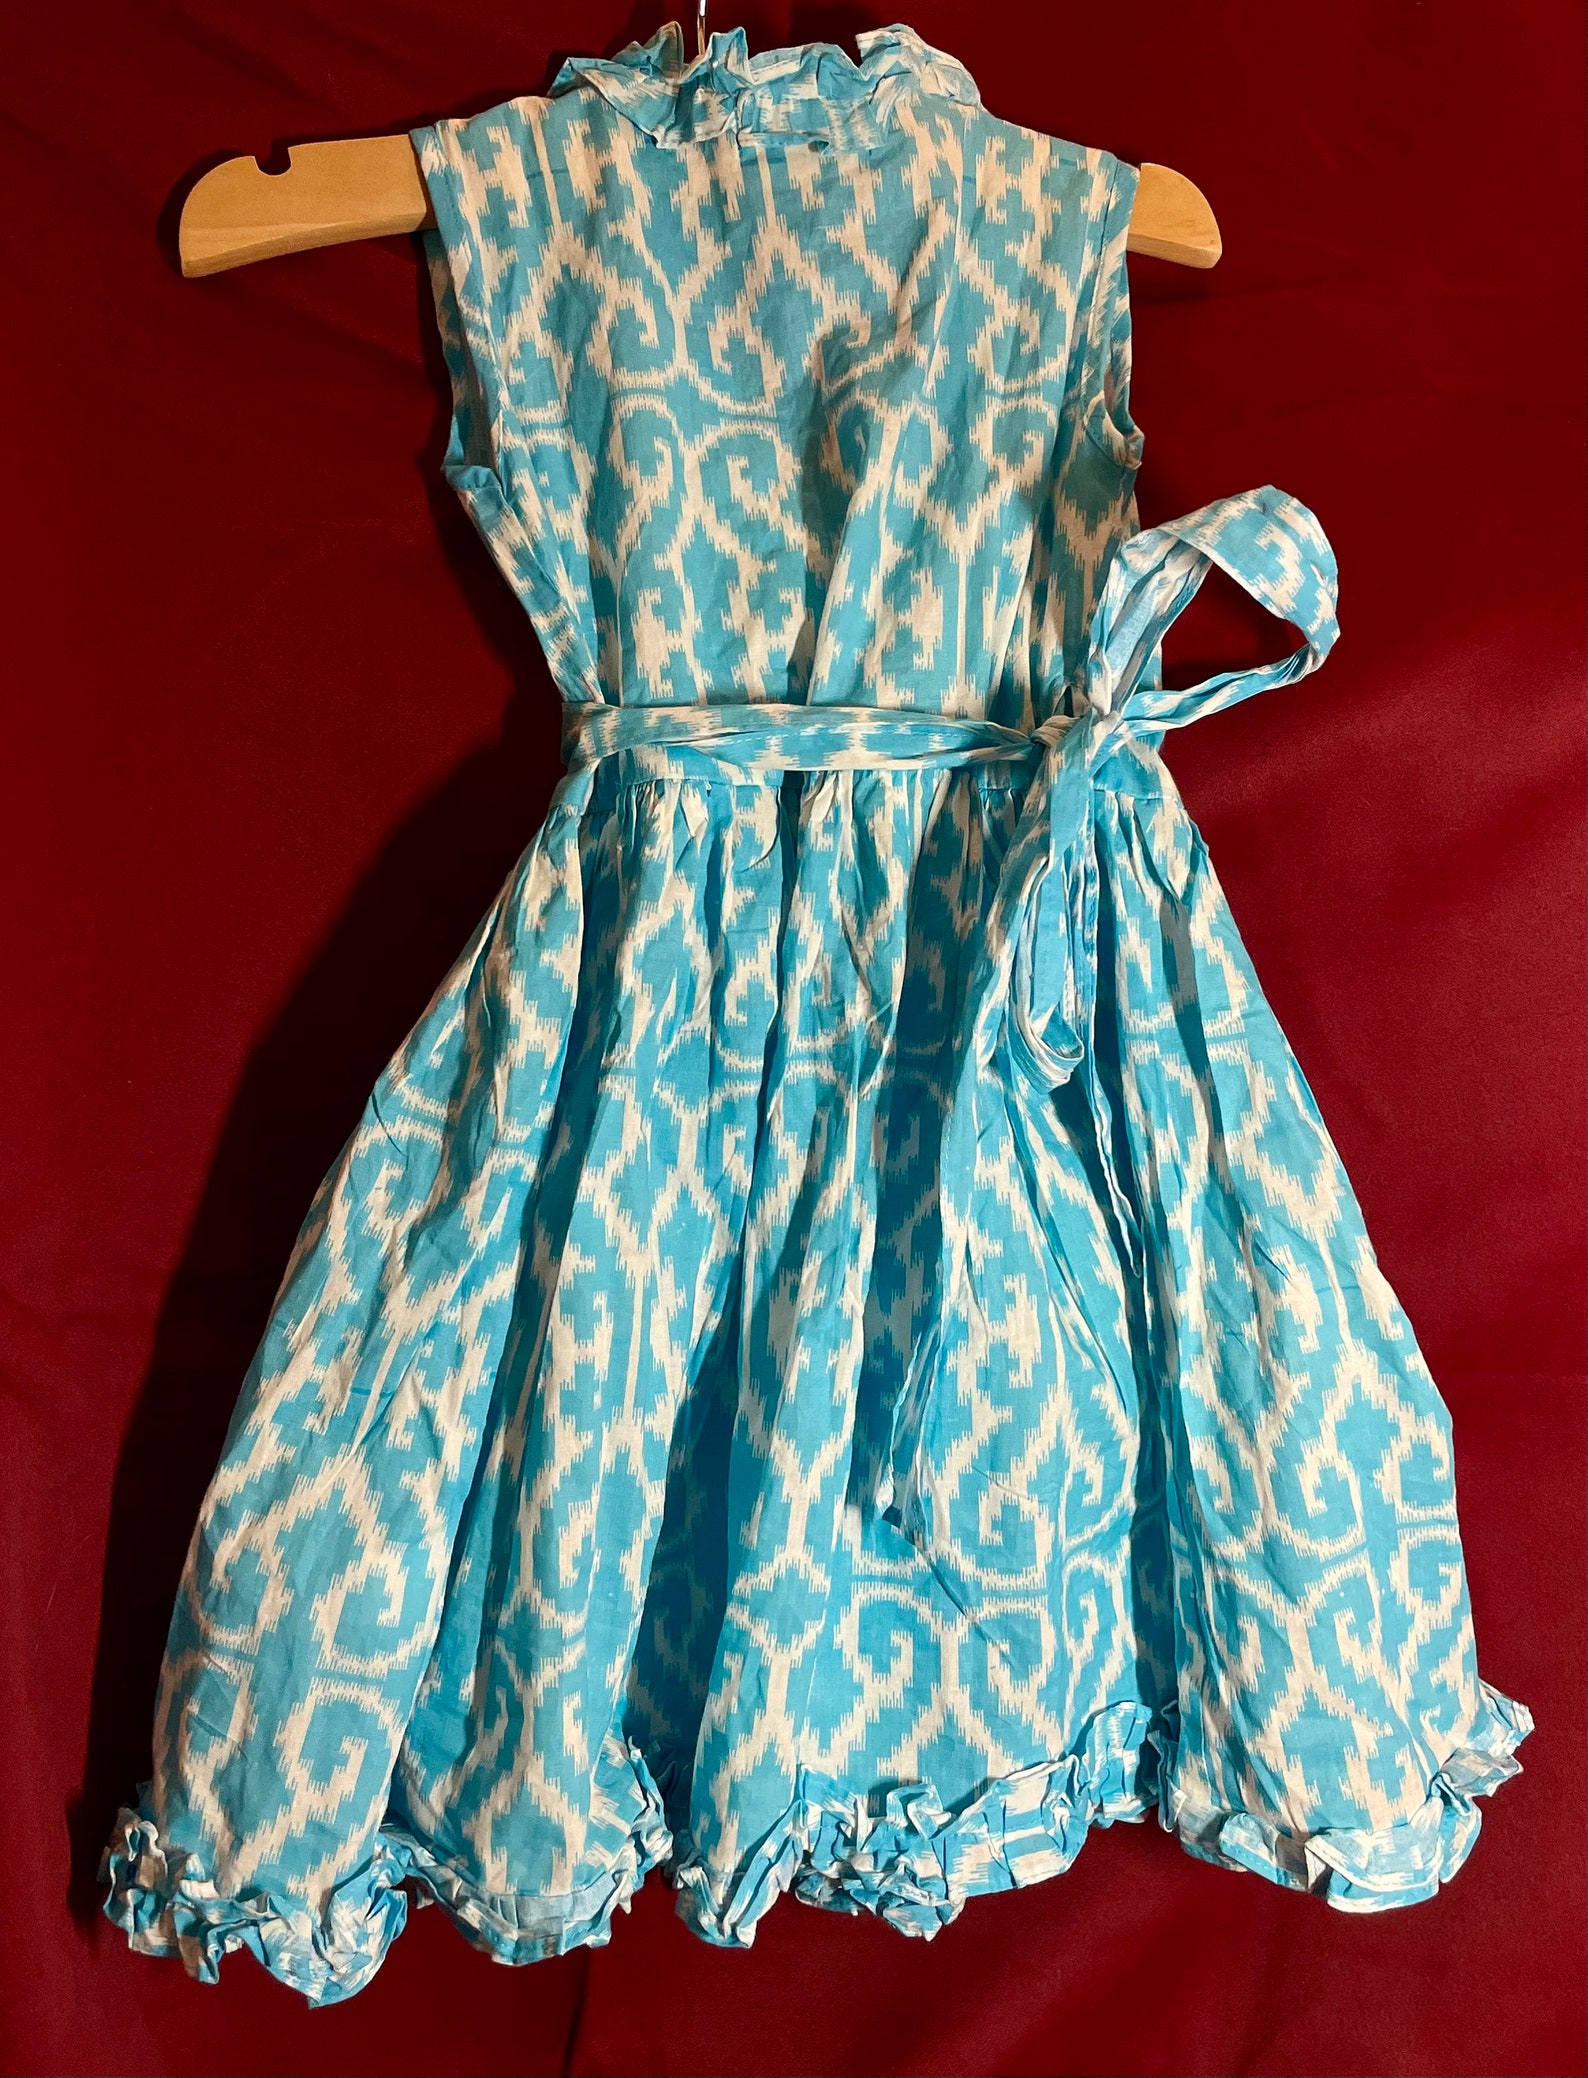 White Wrap Dress with Blue Swirl Pattern and Ruffles by | Etsy